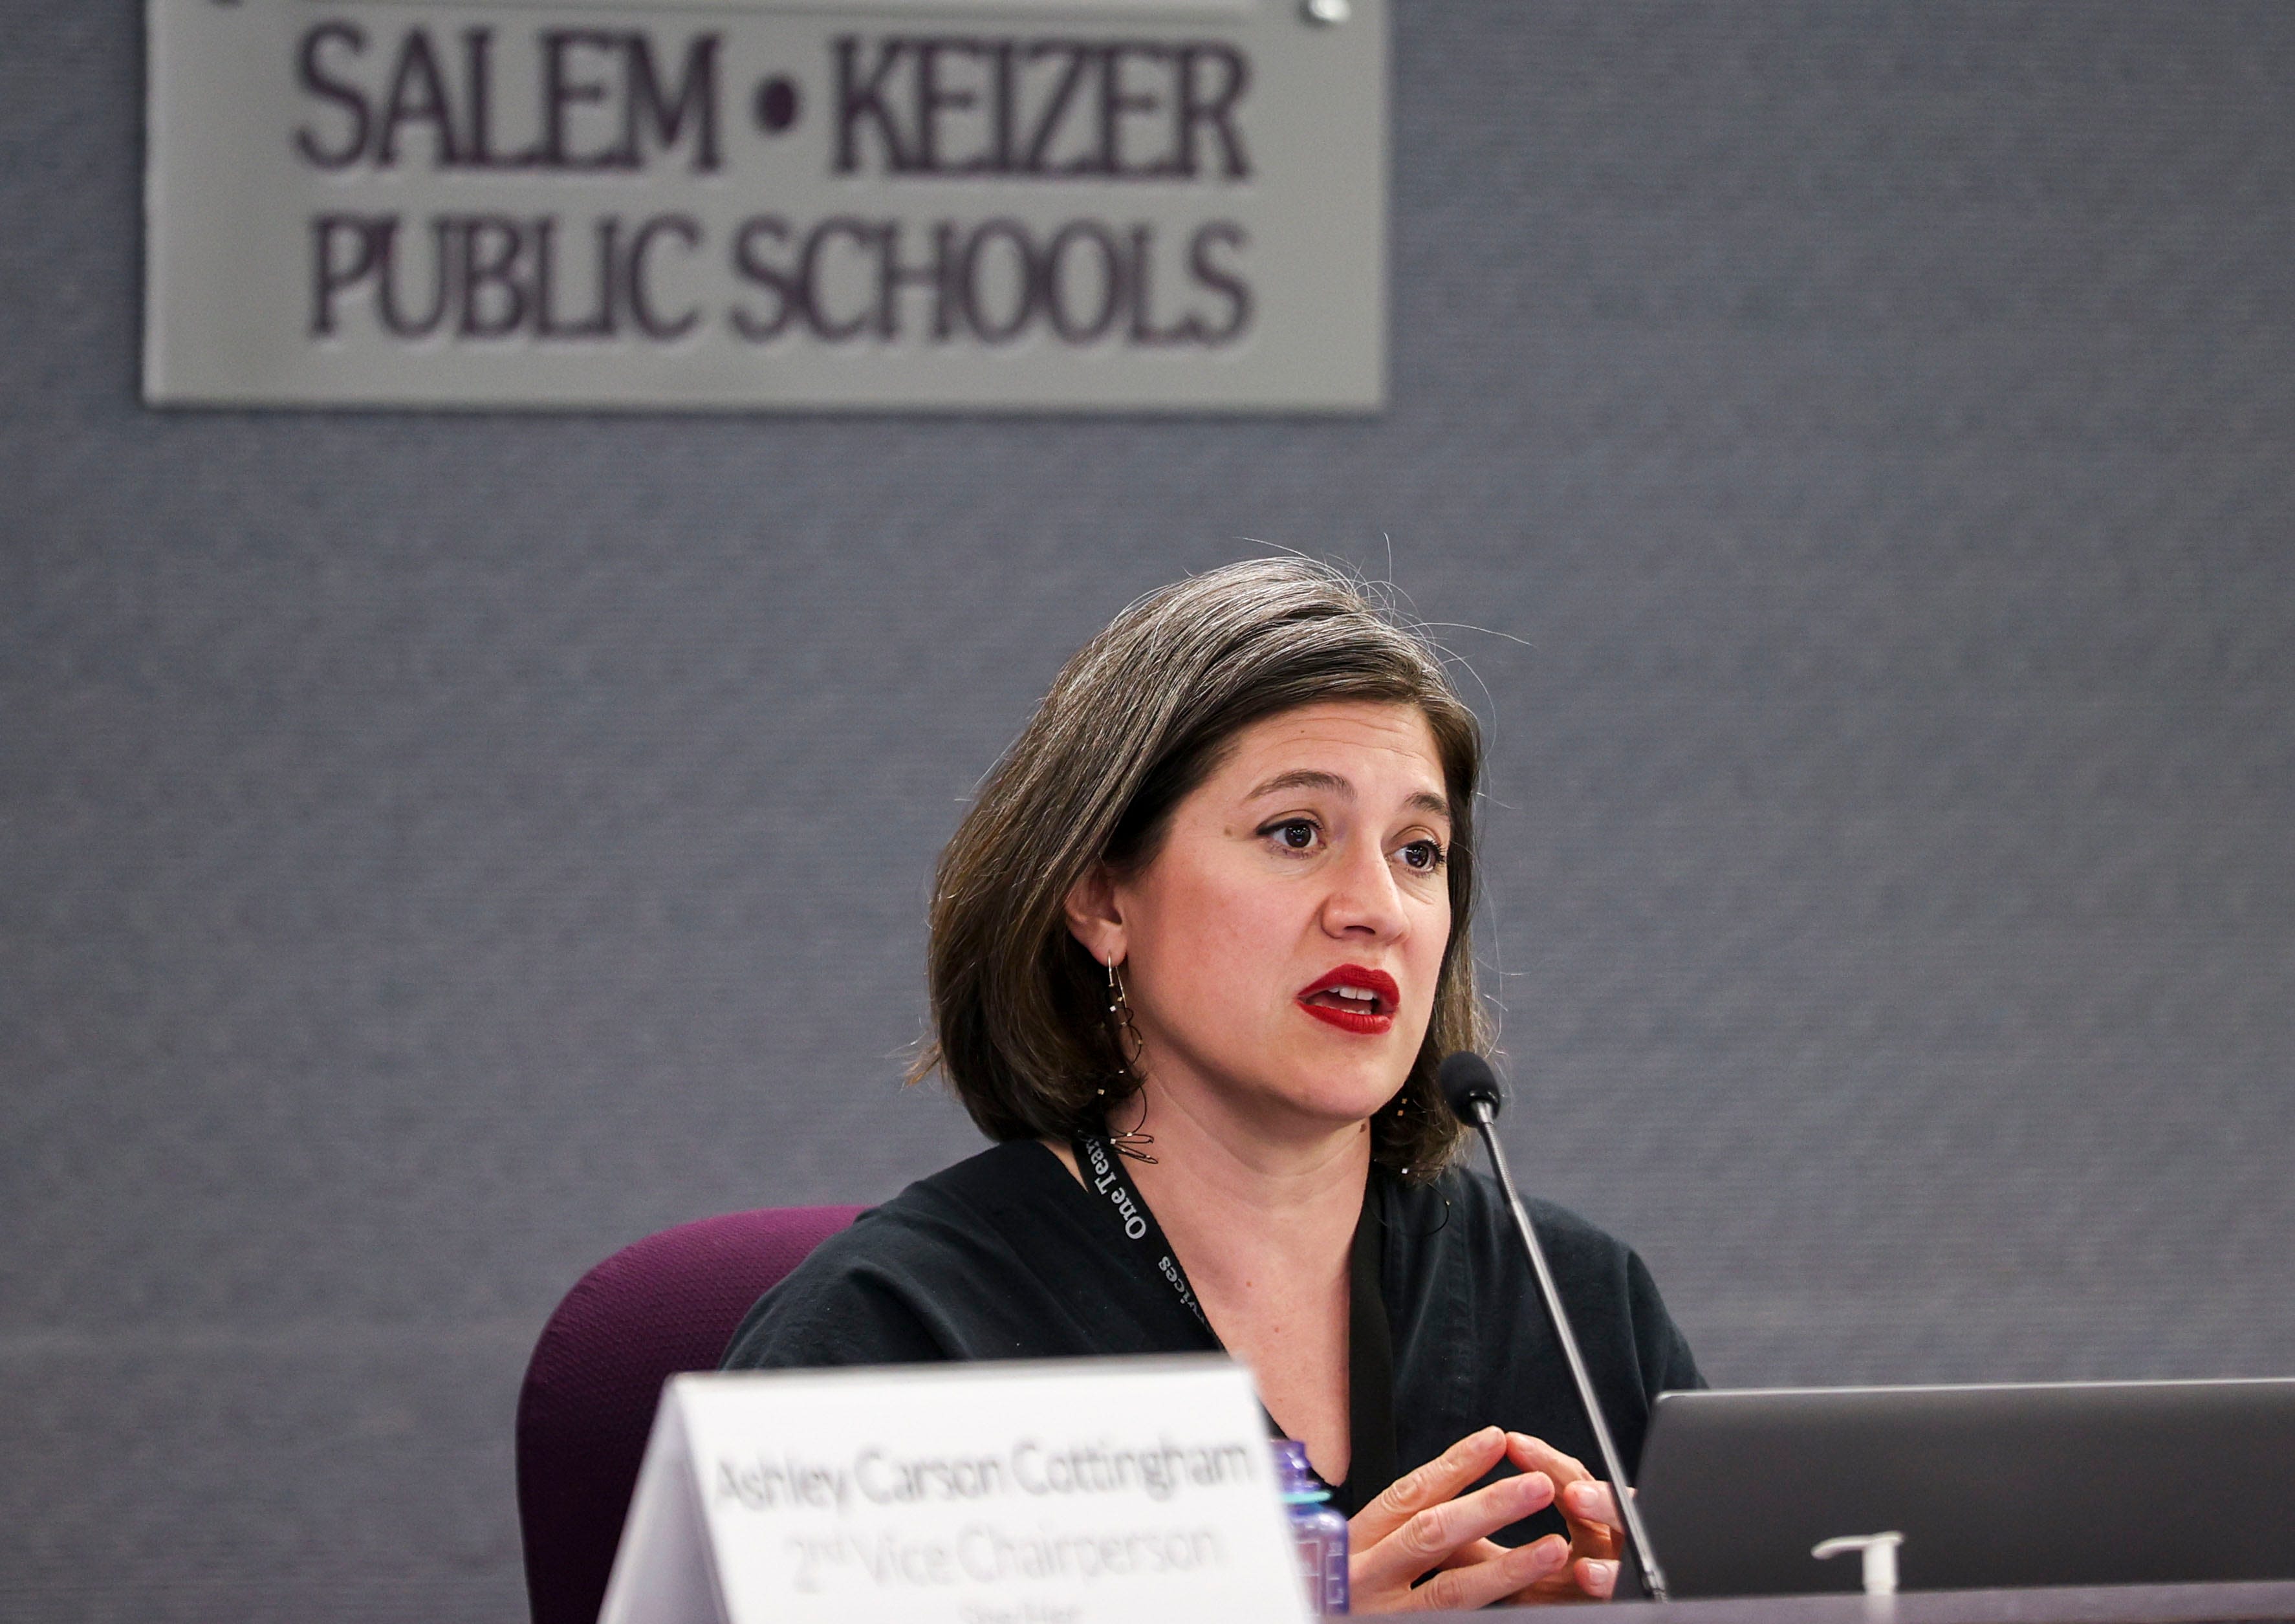 Nearly a third of Salem-Keizer Public Schools employees terminated or reassigned